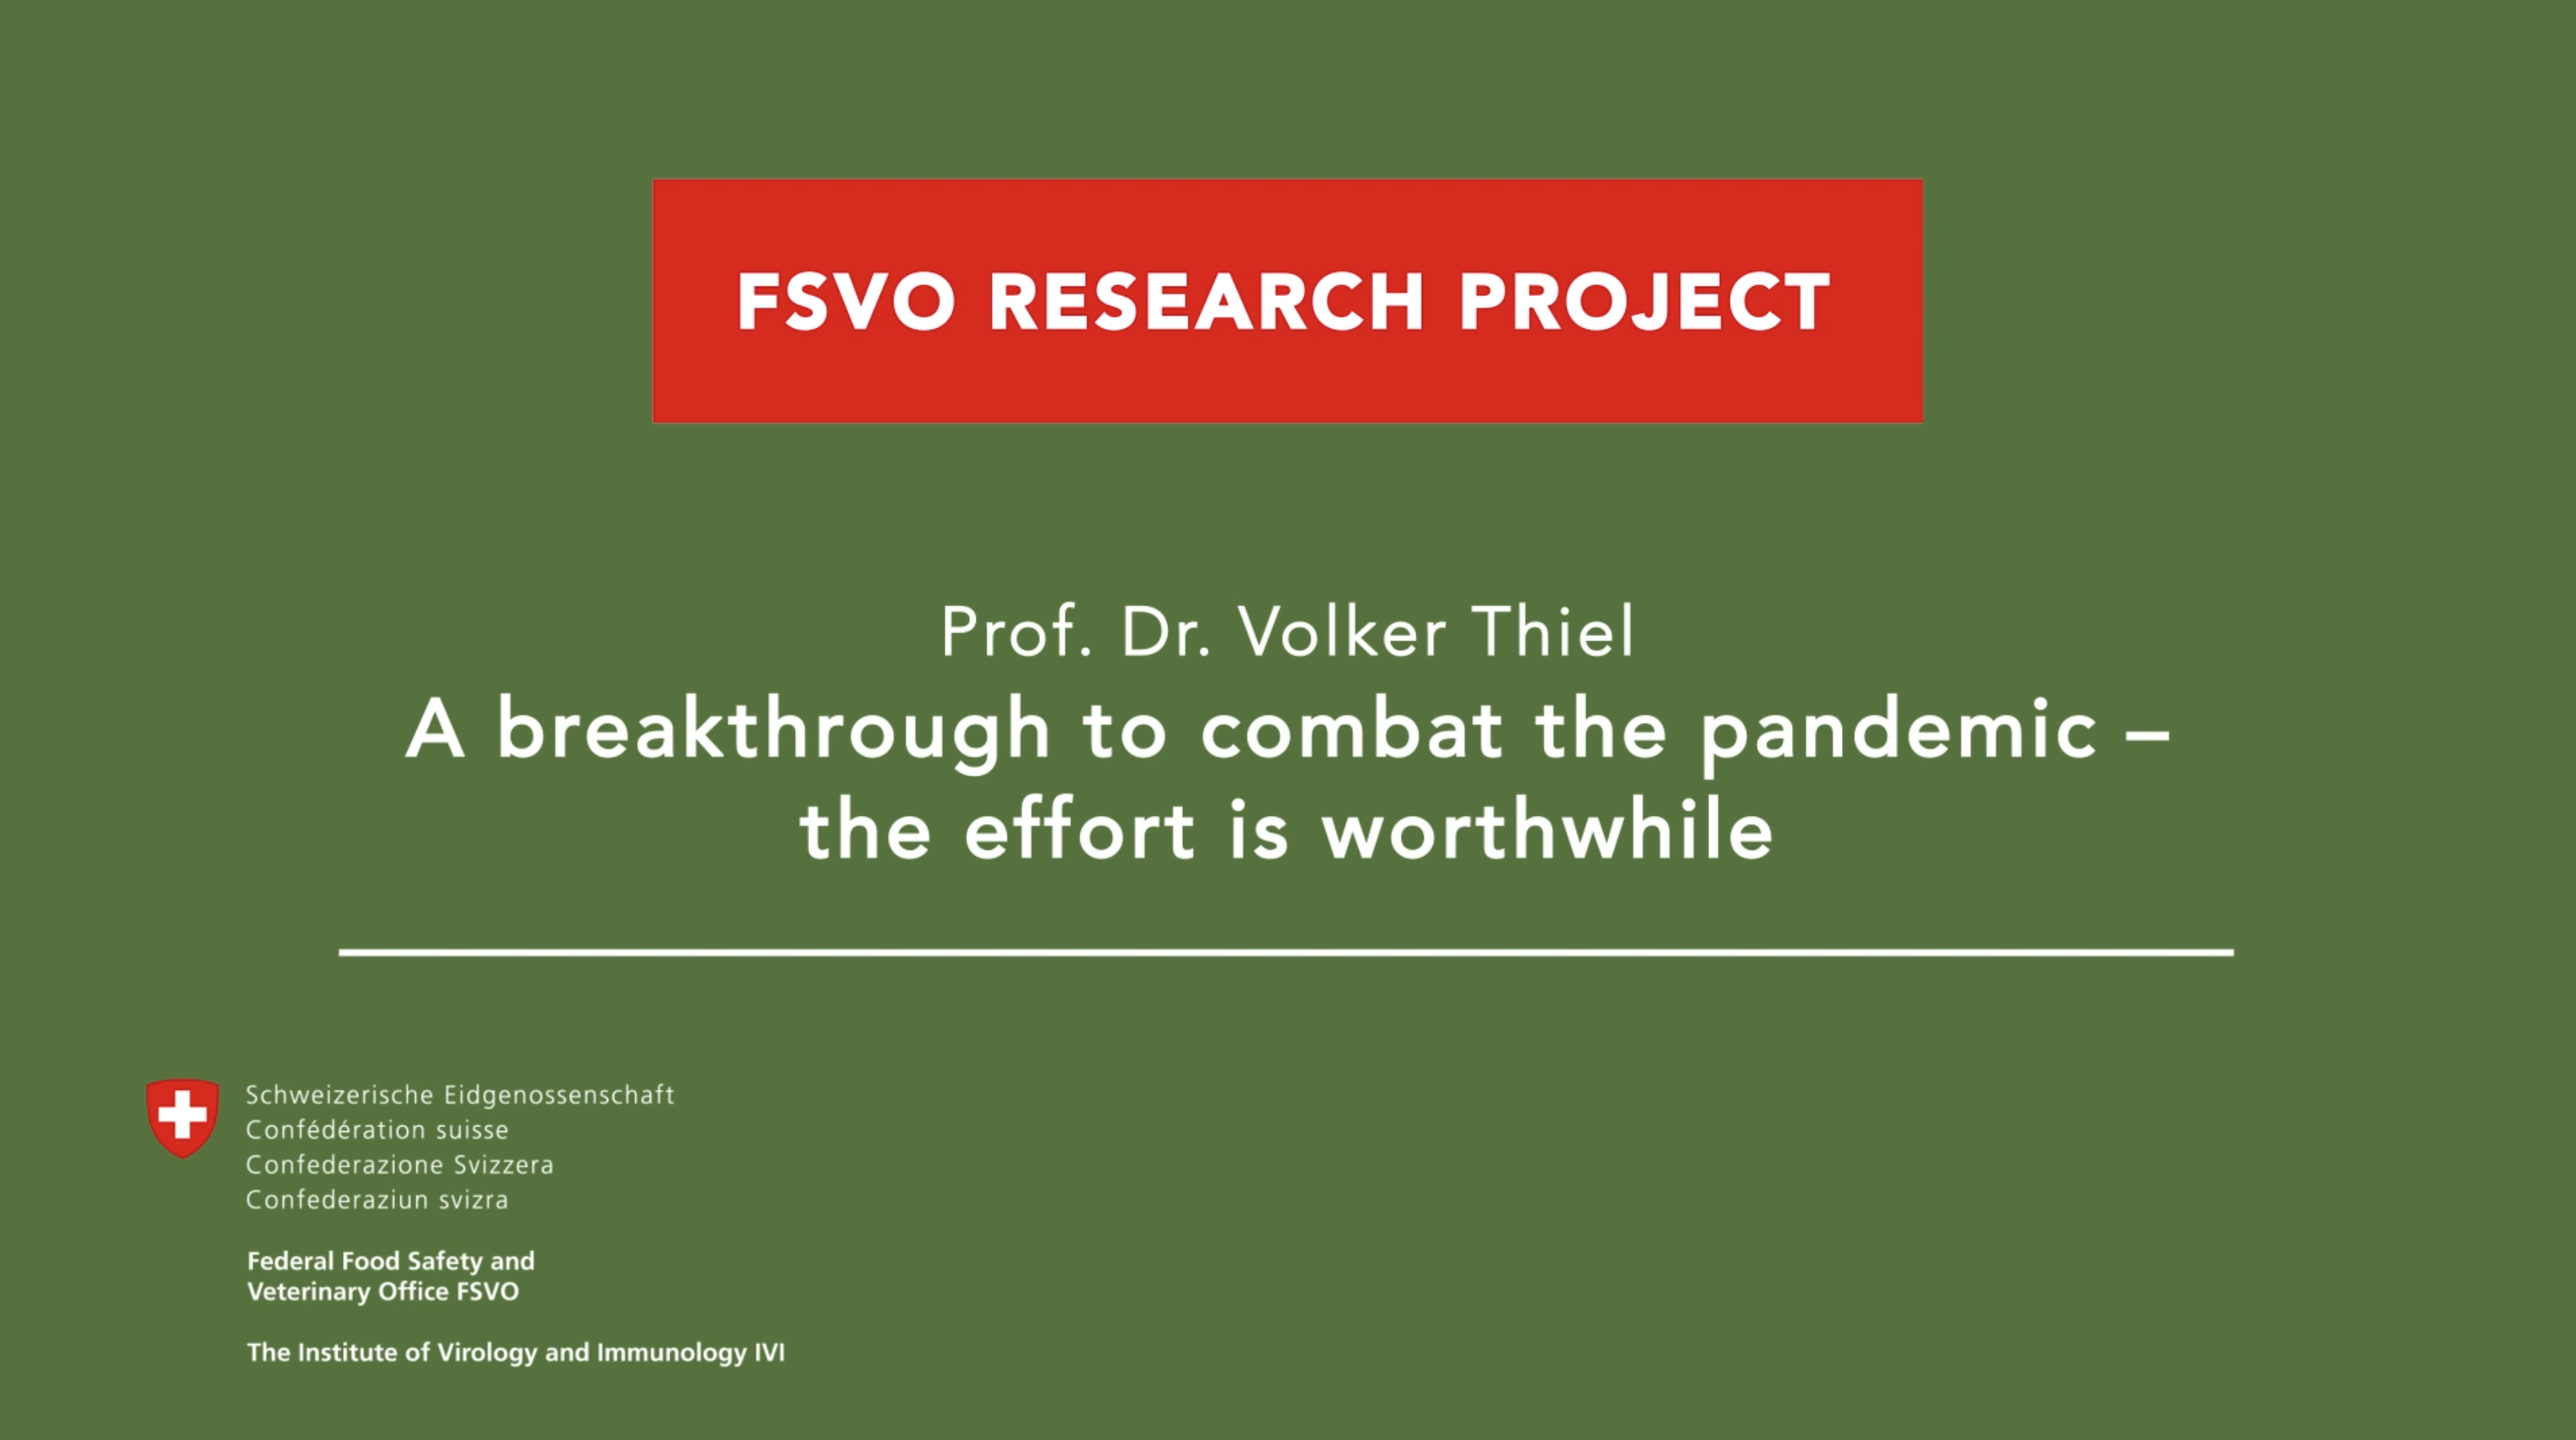 A breakthrough to combat the pandemic – the effort is worthwhile